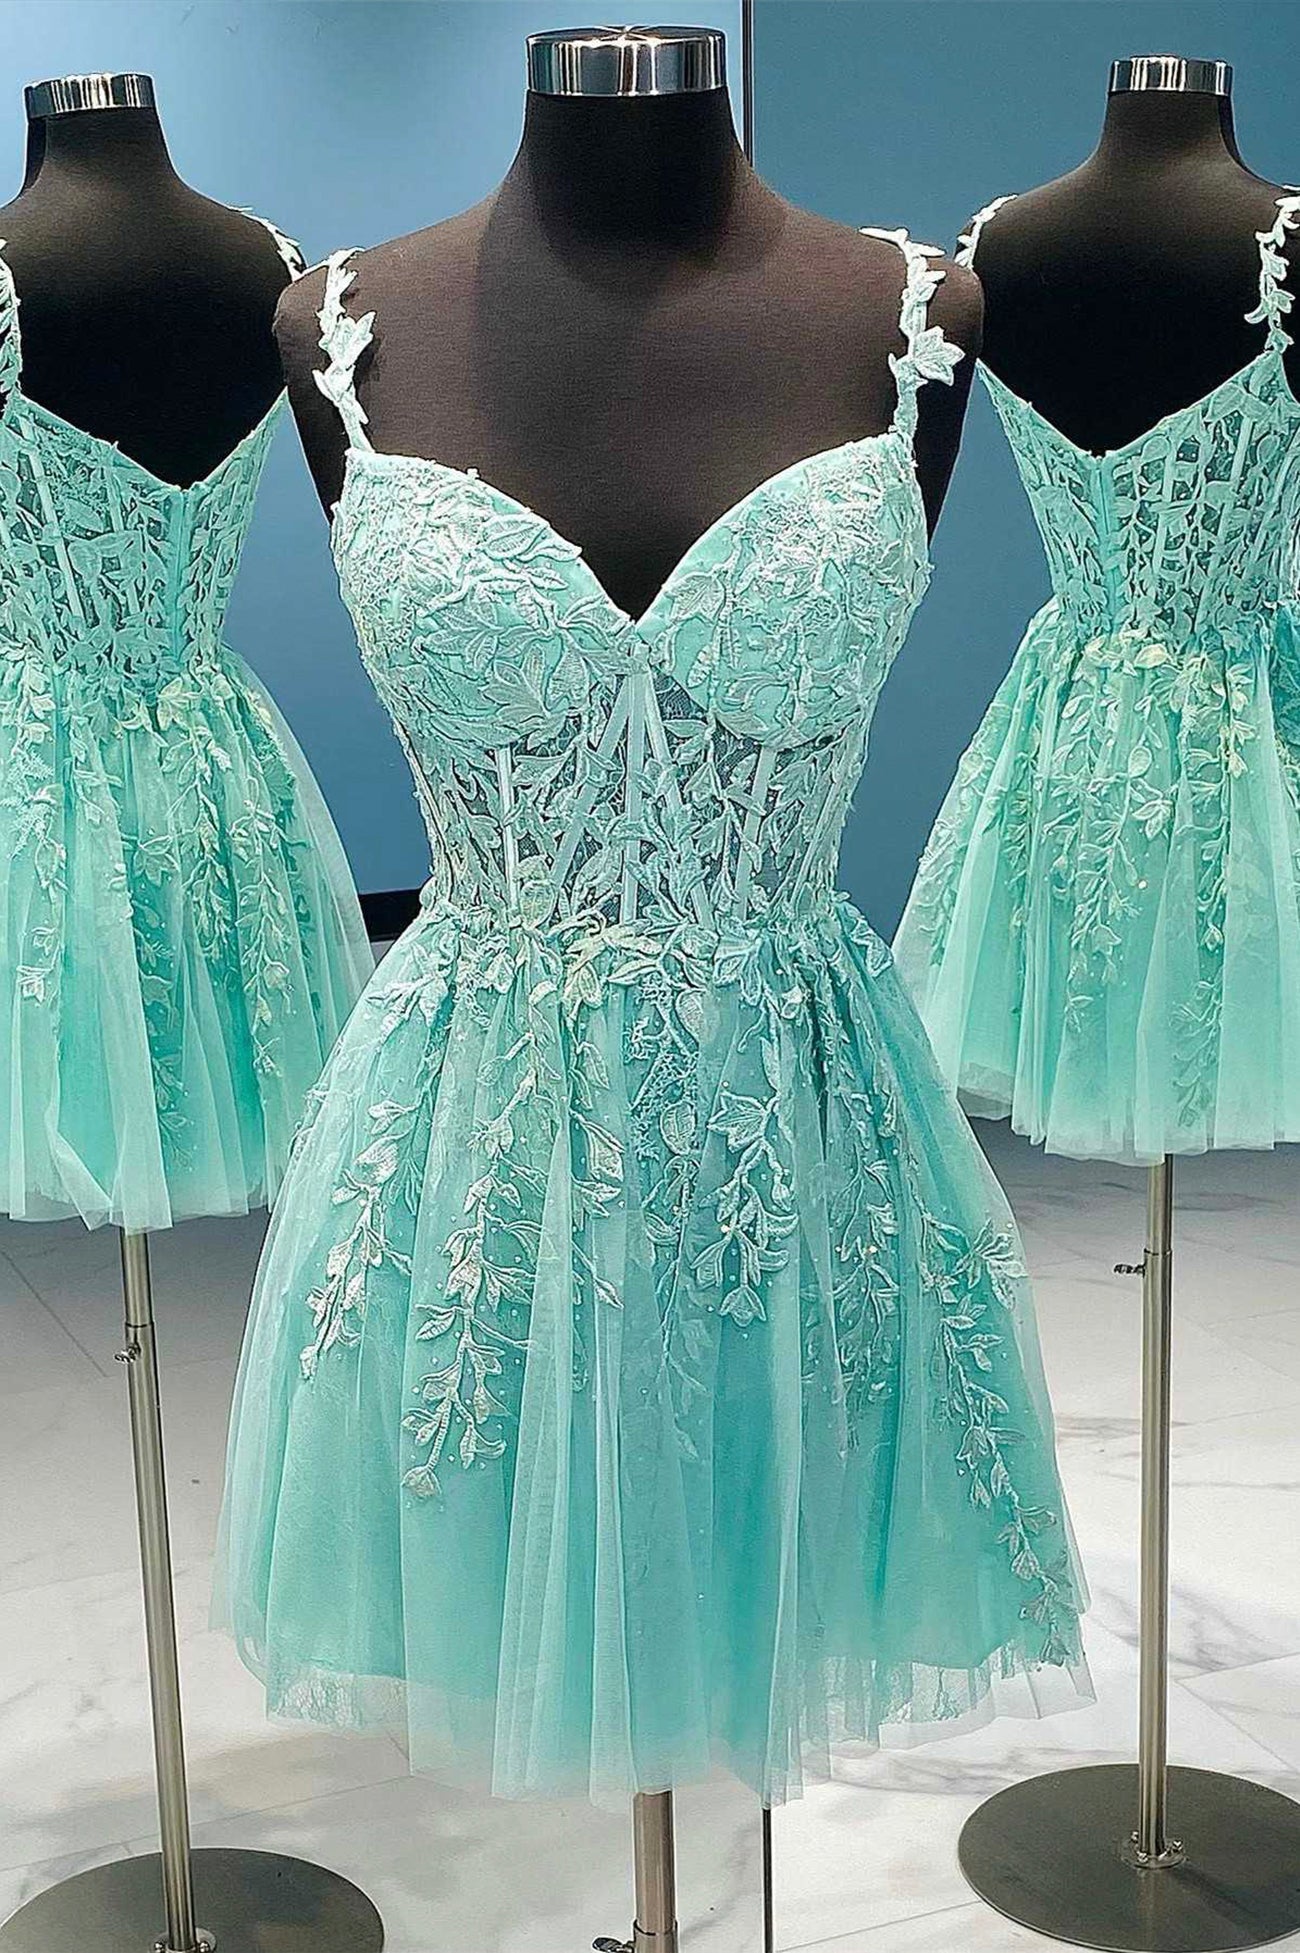 Party Dresses Idea, A-Line Tulle Lace Short Prom Dress, Cute Spaghetti Strap Party Dress